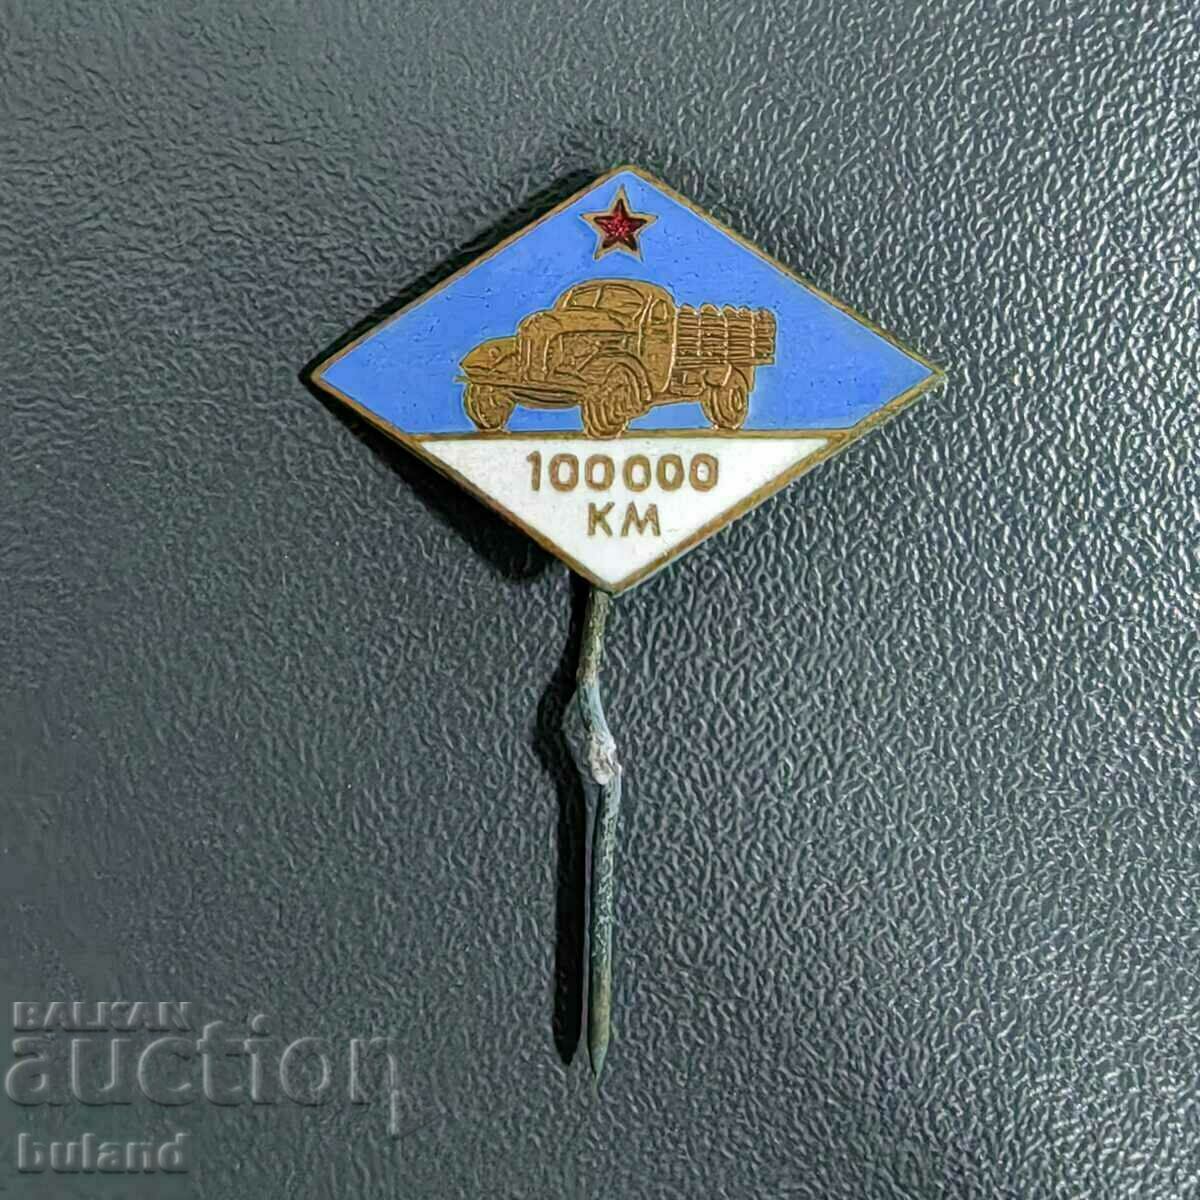 Bulgaria Social Badge 100,000 km. Accident Free Driving Email